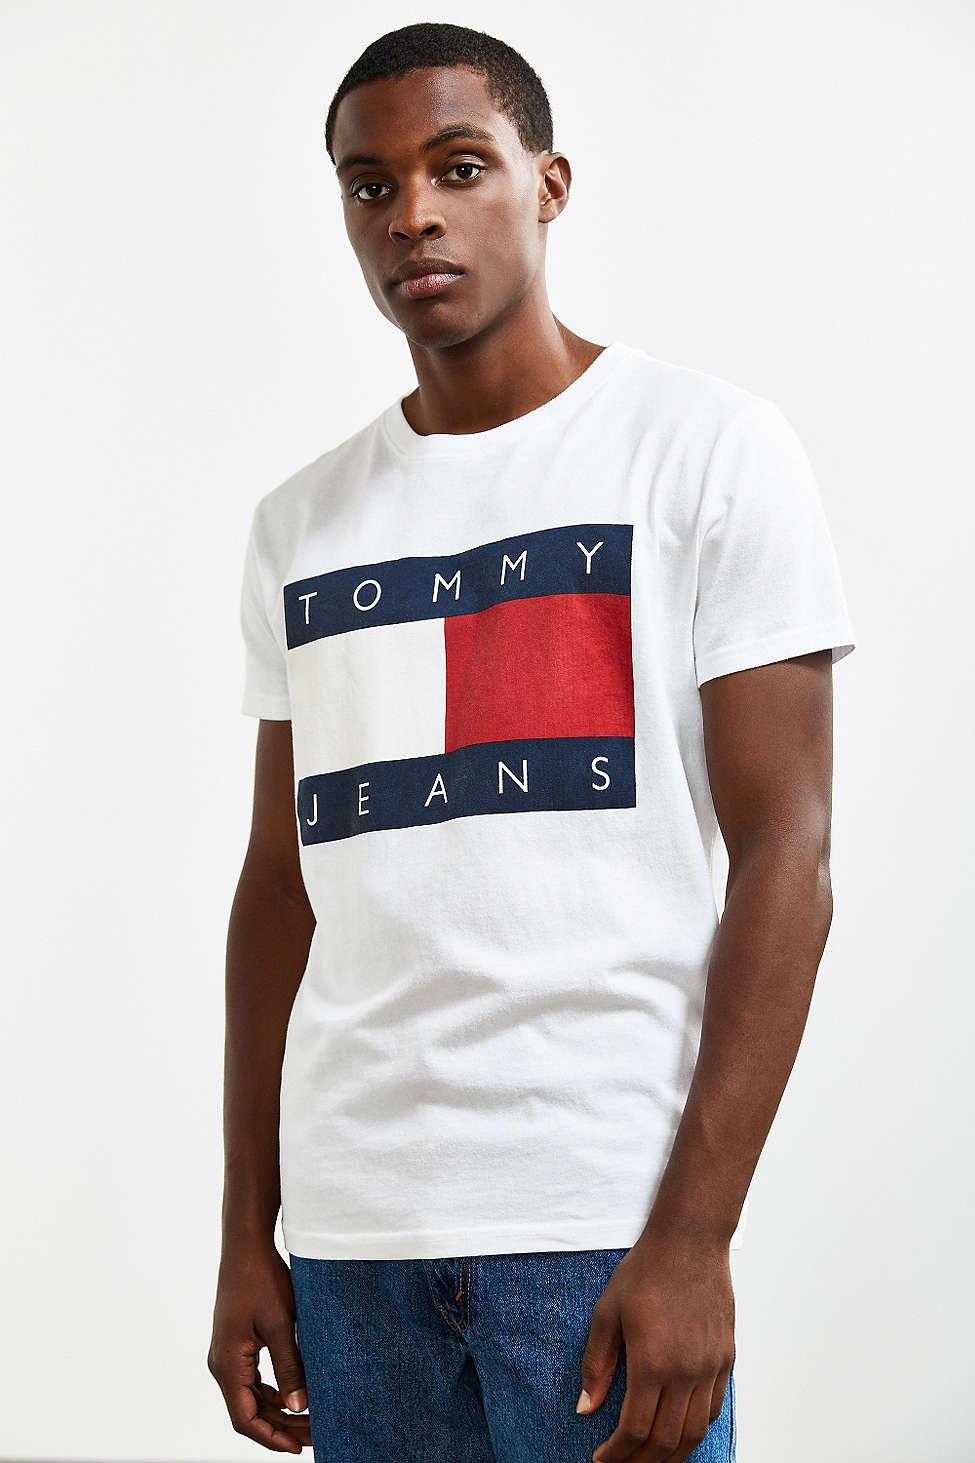 tommy jeans 90s logo tee